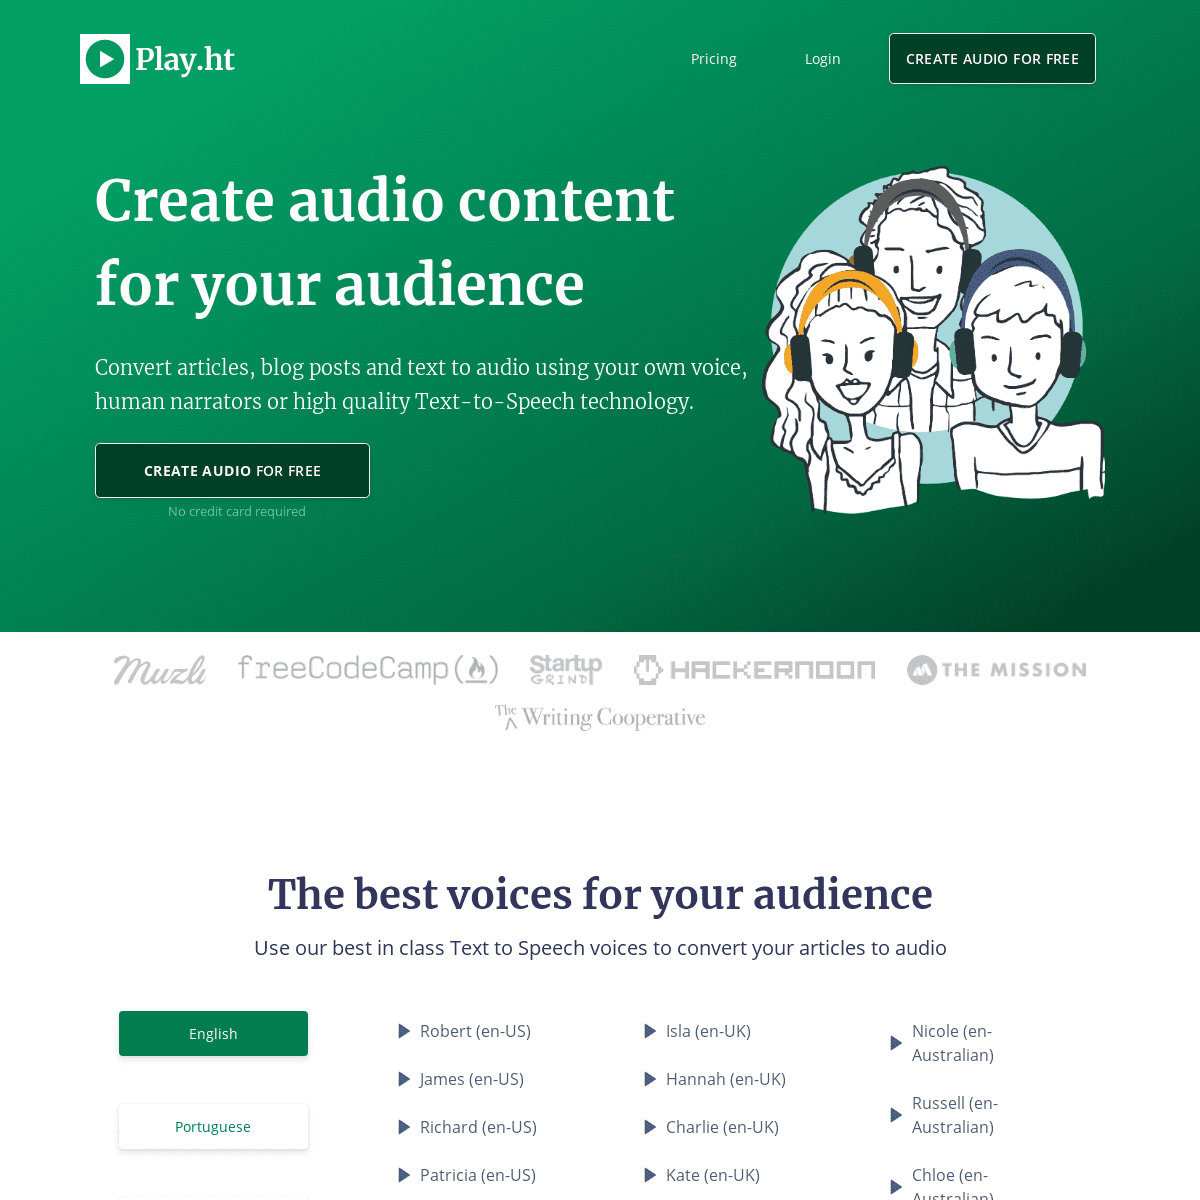 Play.ht | Create audio content for your audience